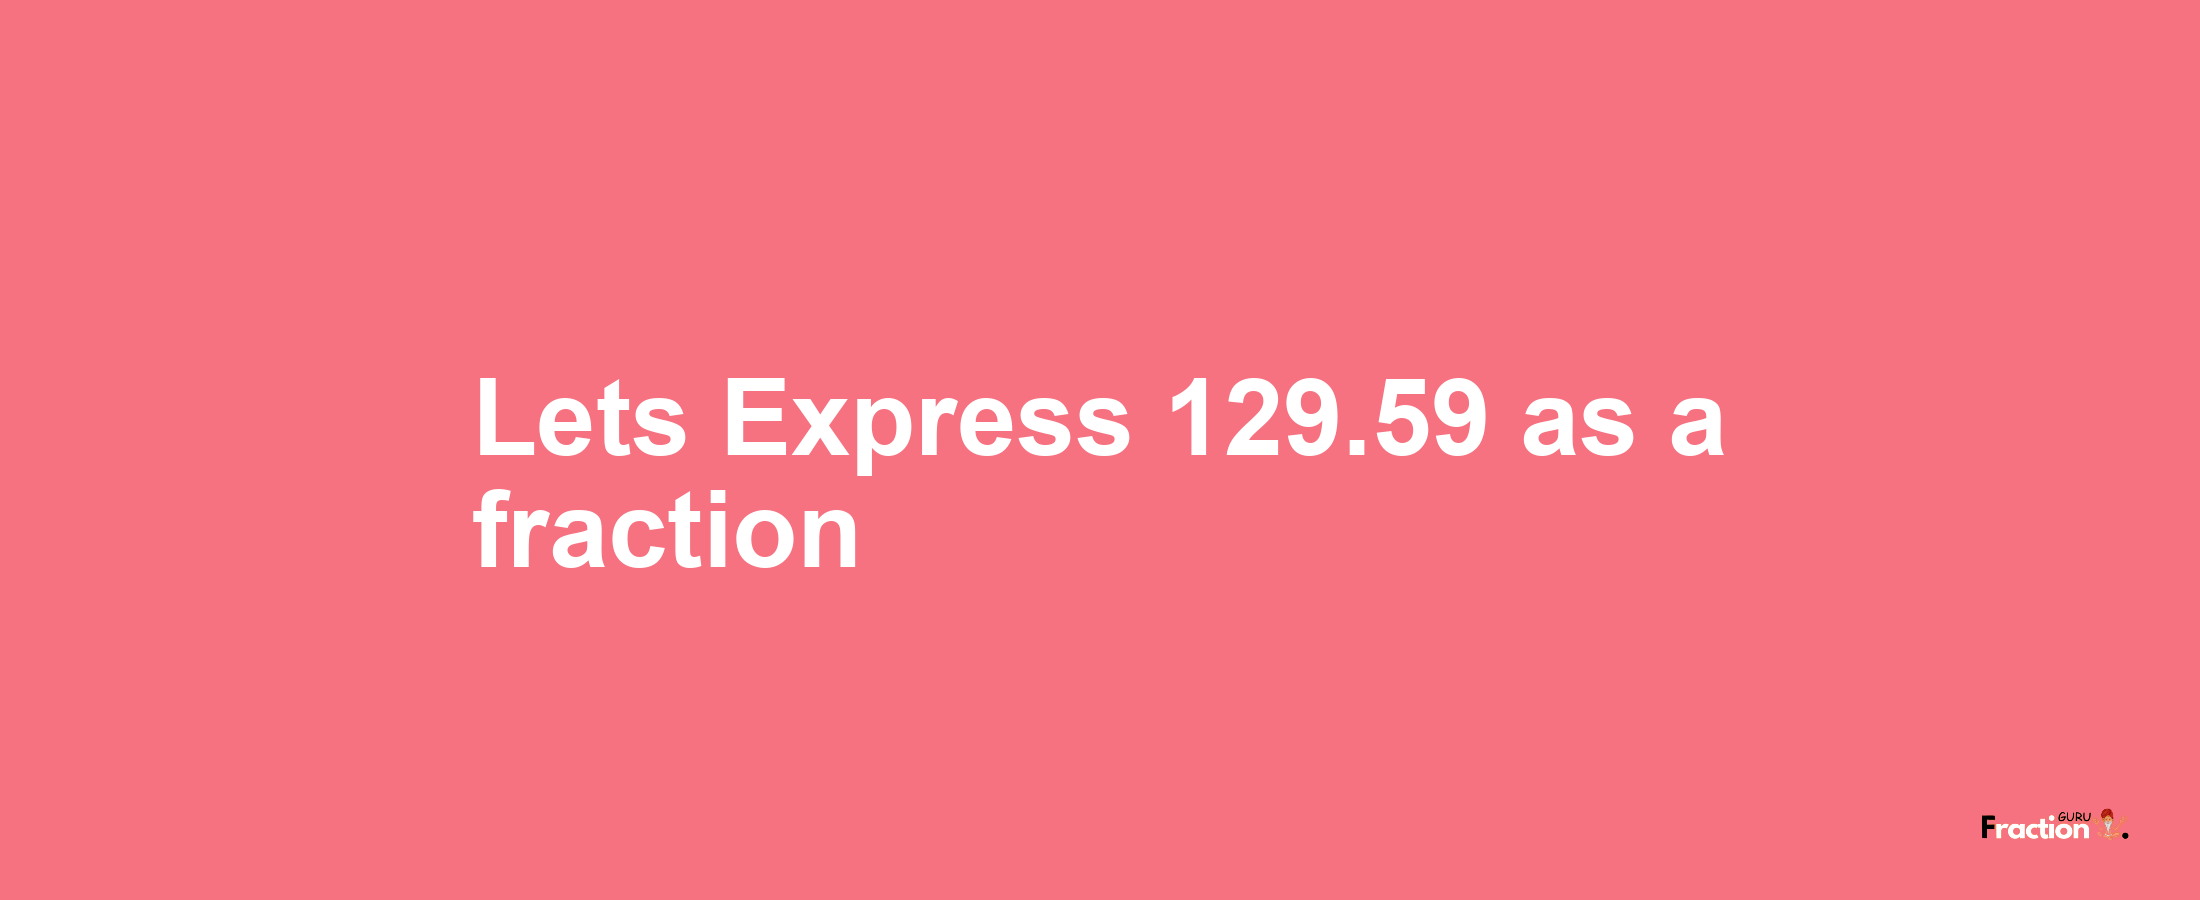 Lets Express 129.59 as afraction